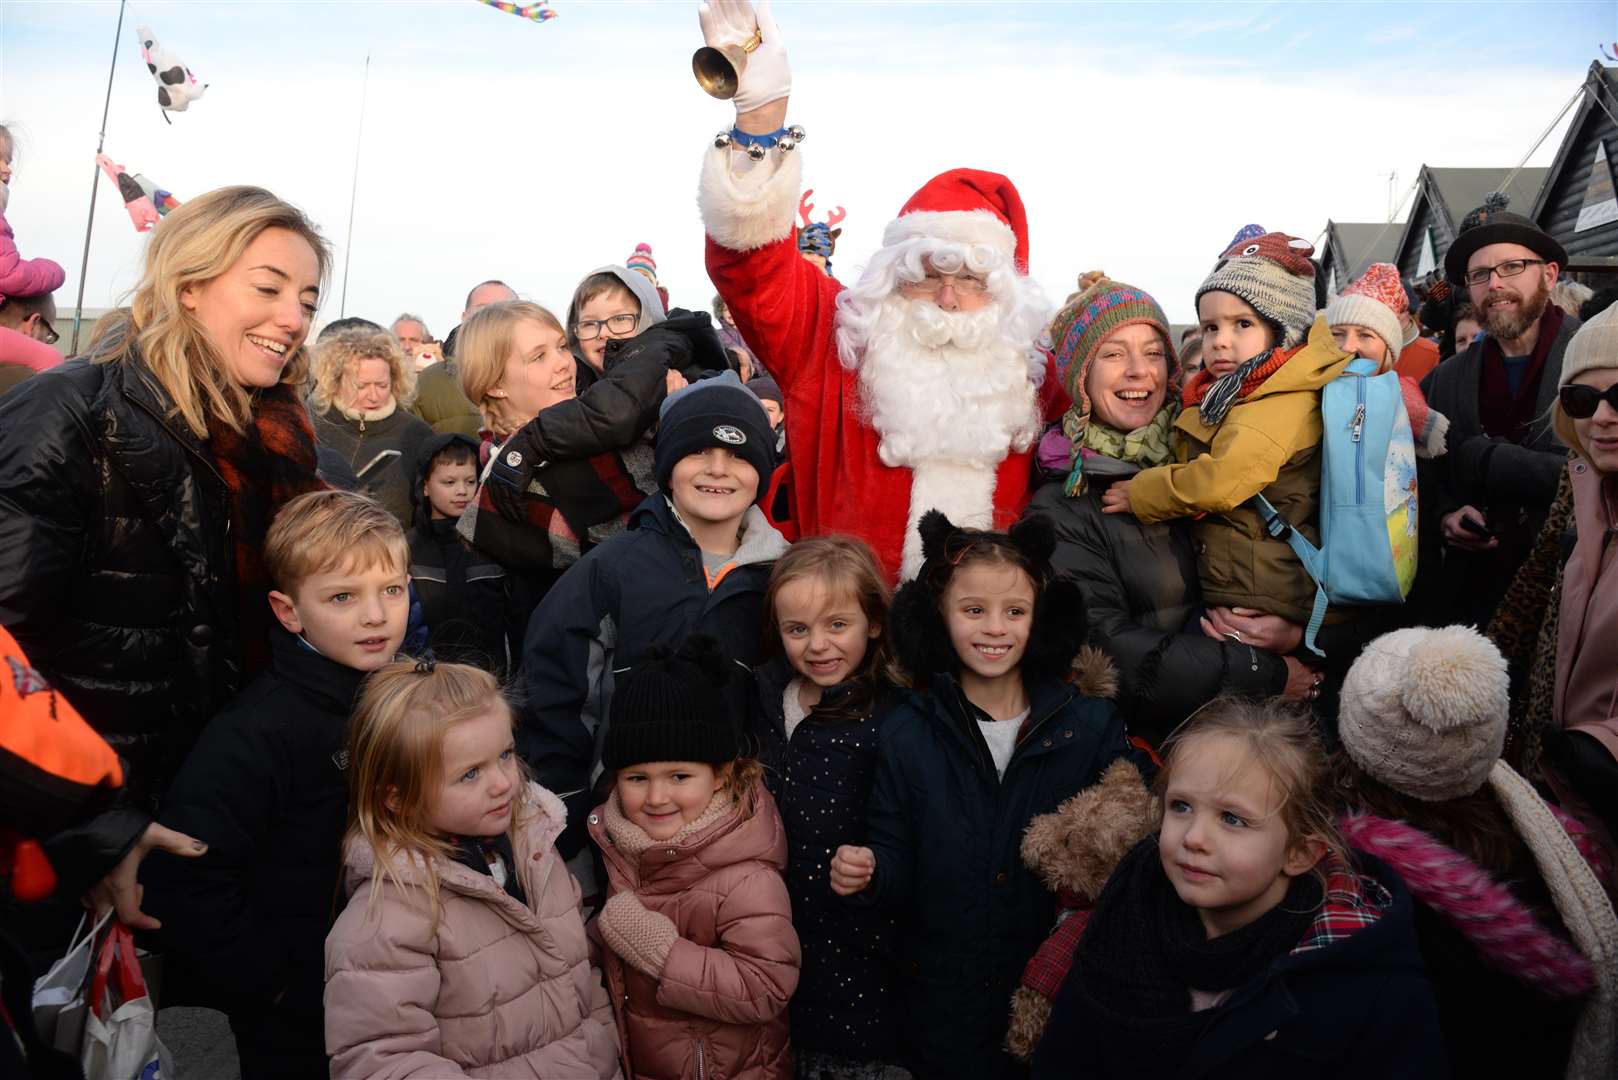 Father Christmas is greeted by the crowds during the WhitSparkle Christmas Celebration in the harbour last year